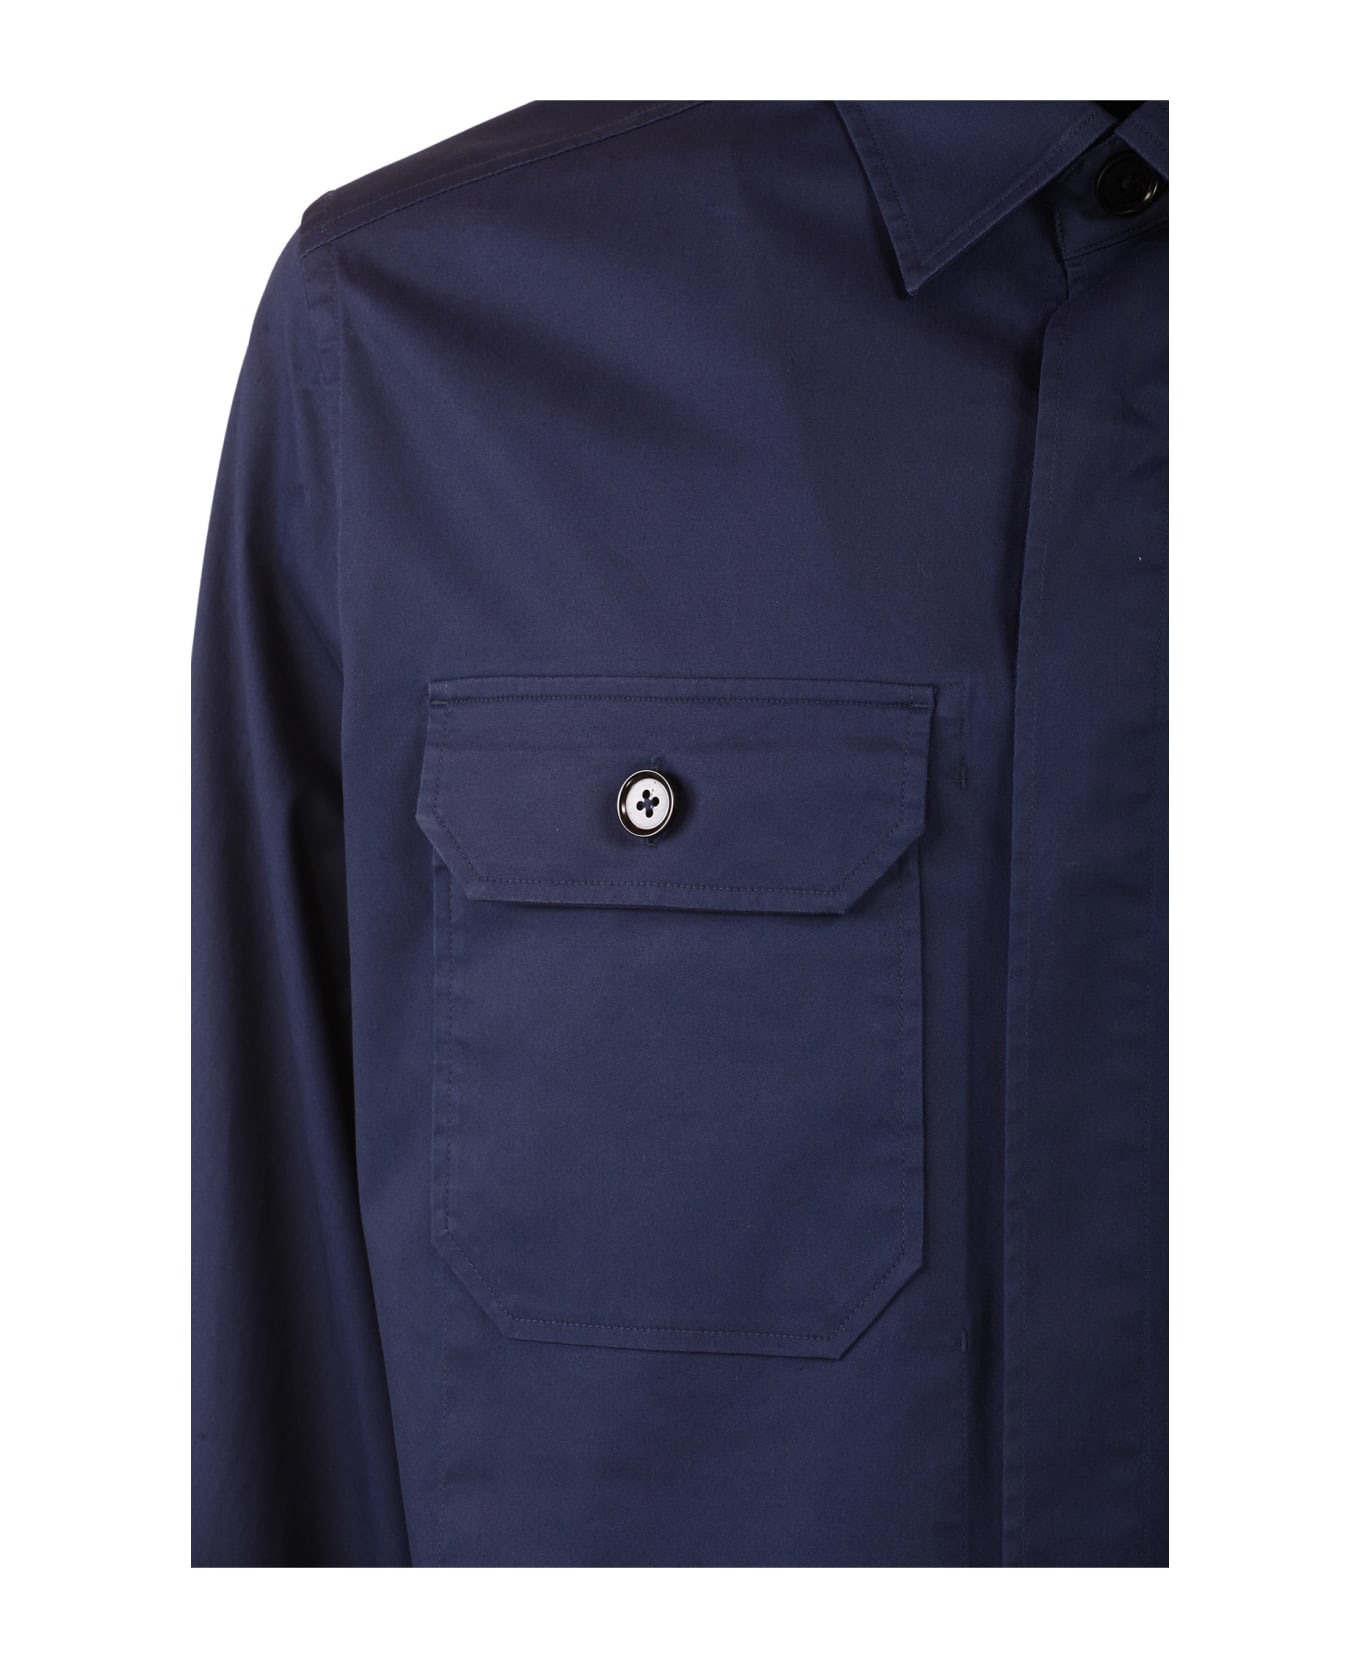 Zegna Jackets Clear Blue - Clear Blue